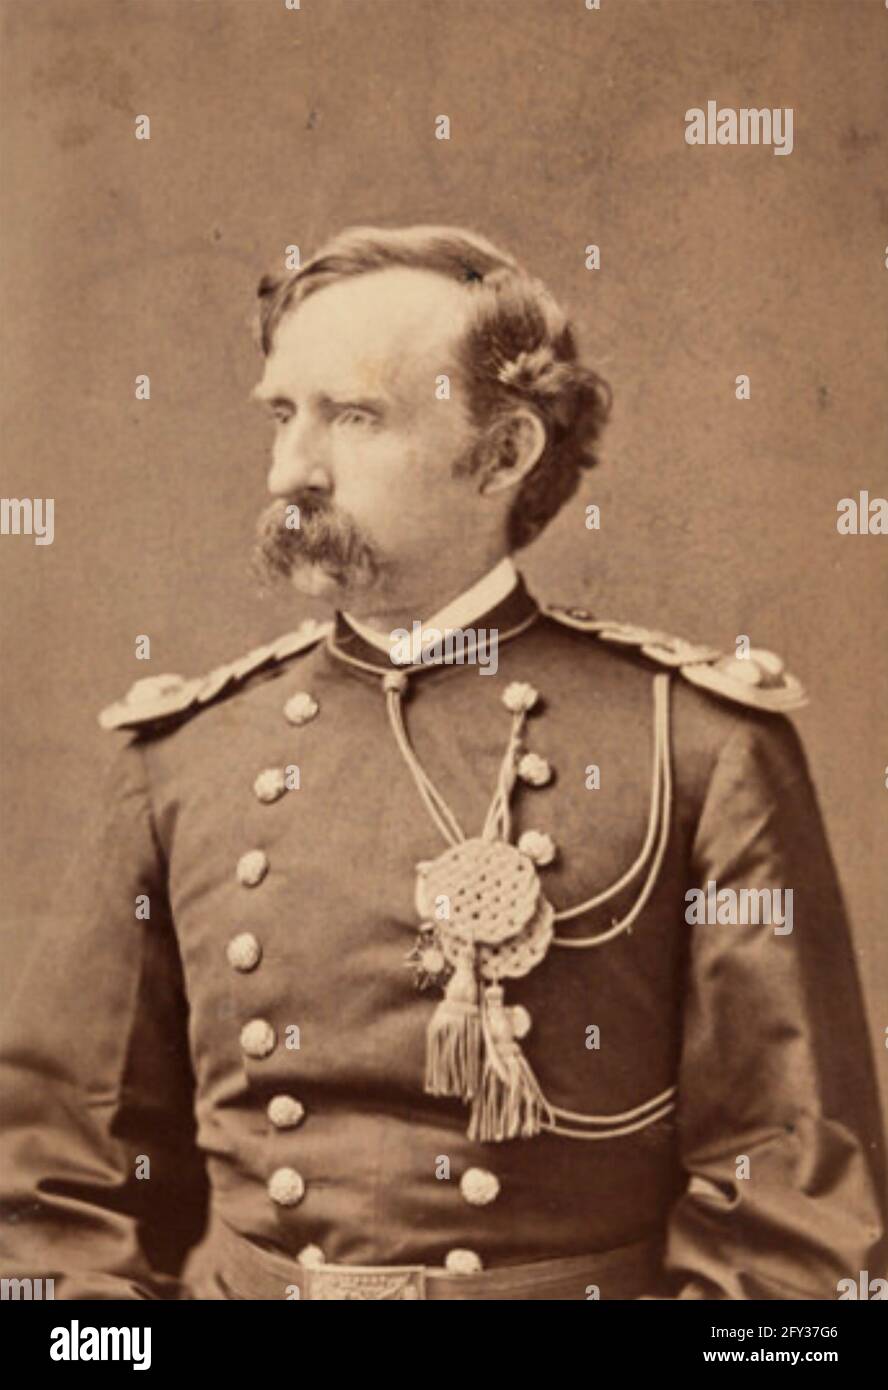 GEORGE ARMSTRONG CUSTER (1839-1876) United Stats Army officer and cavalry commander about 1870 Stock Photo